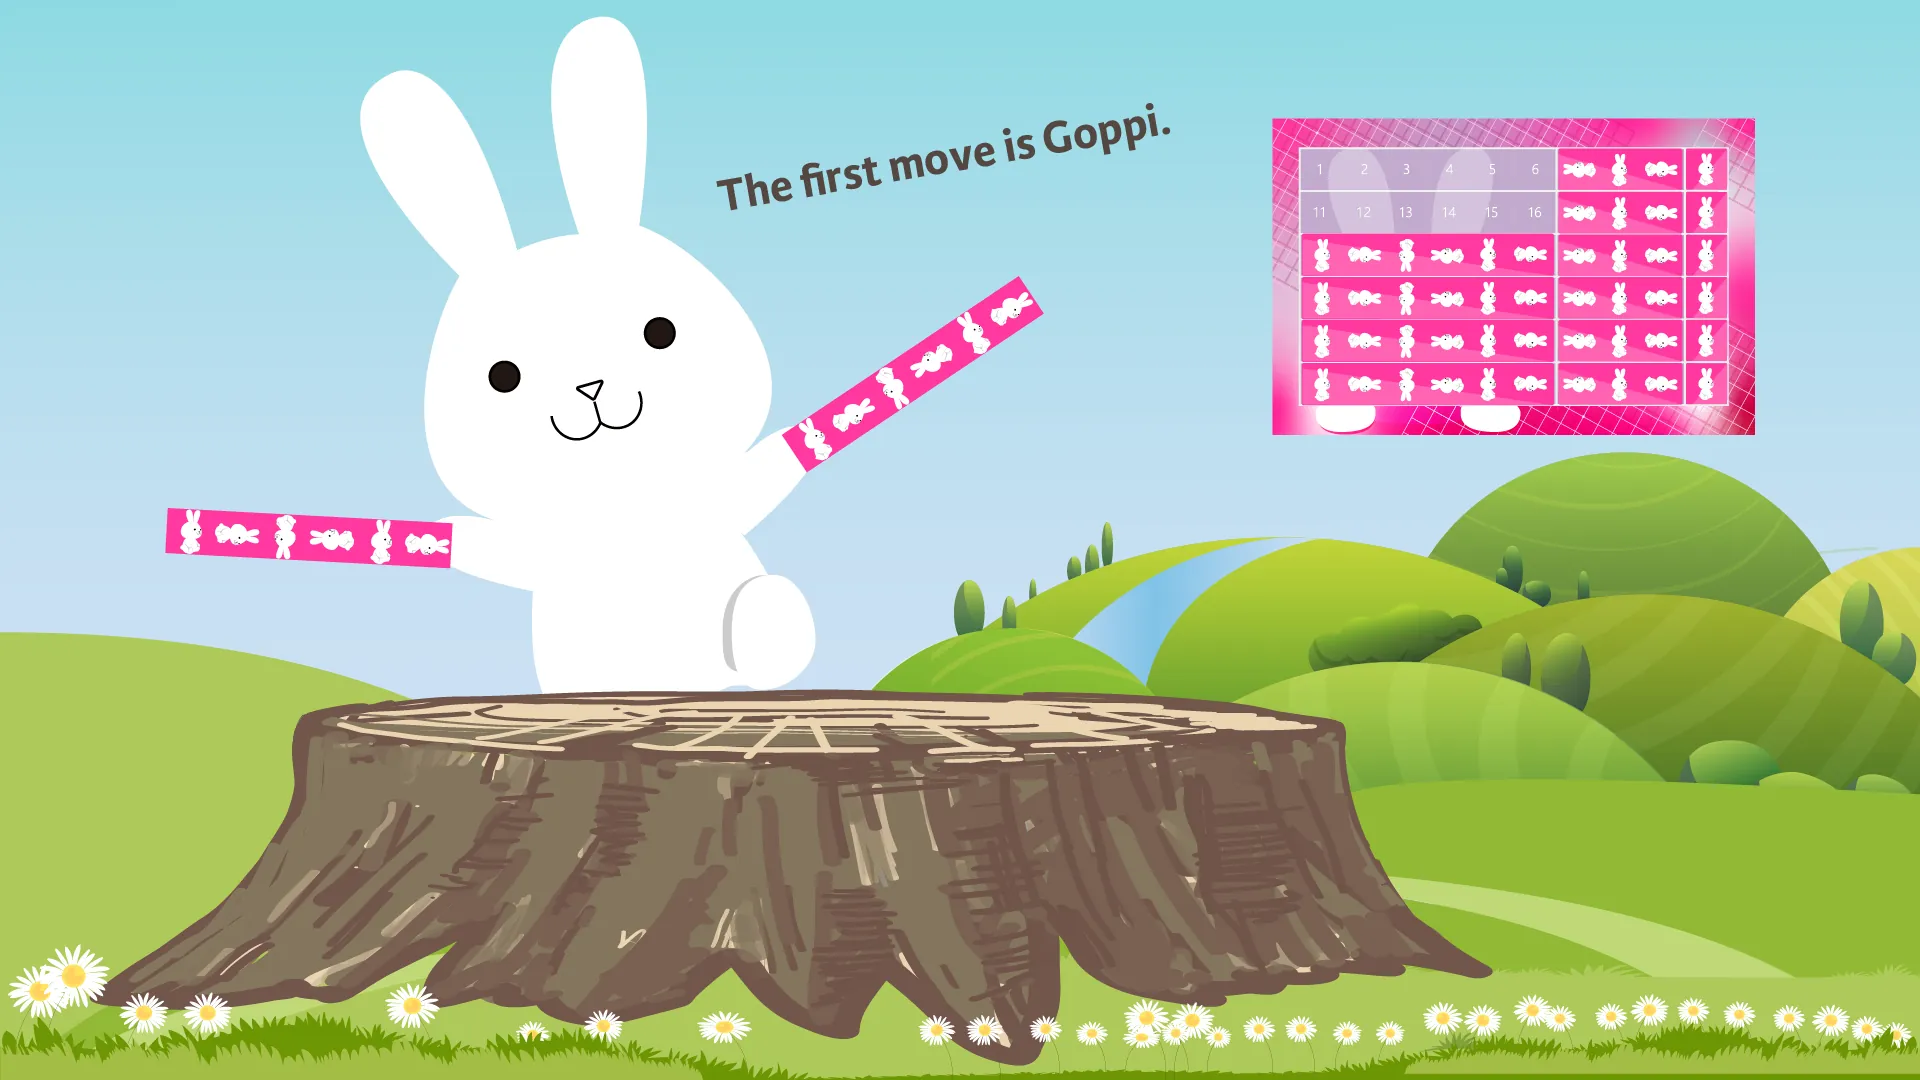 The first move is Goppi.